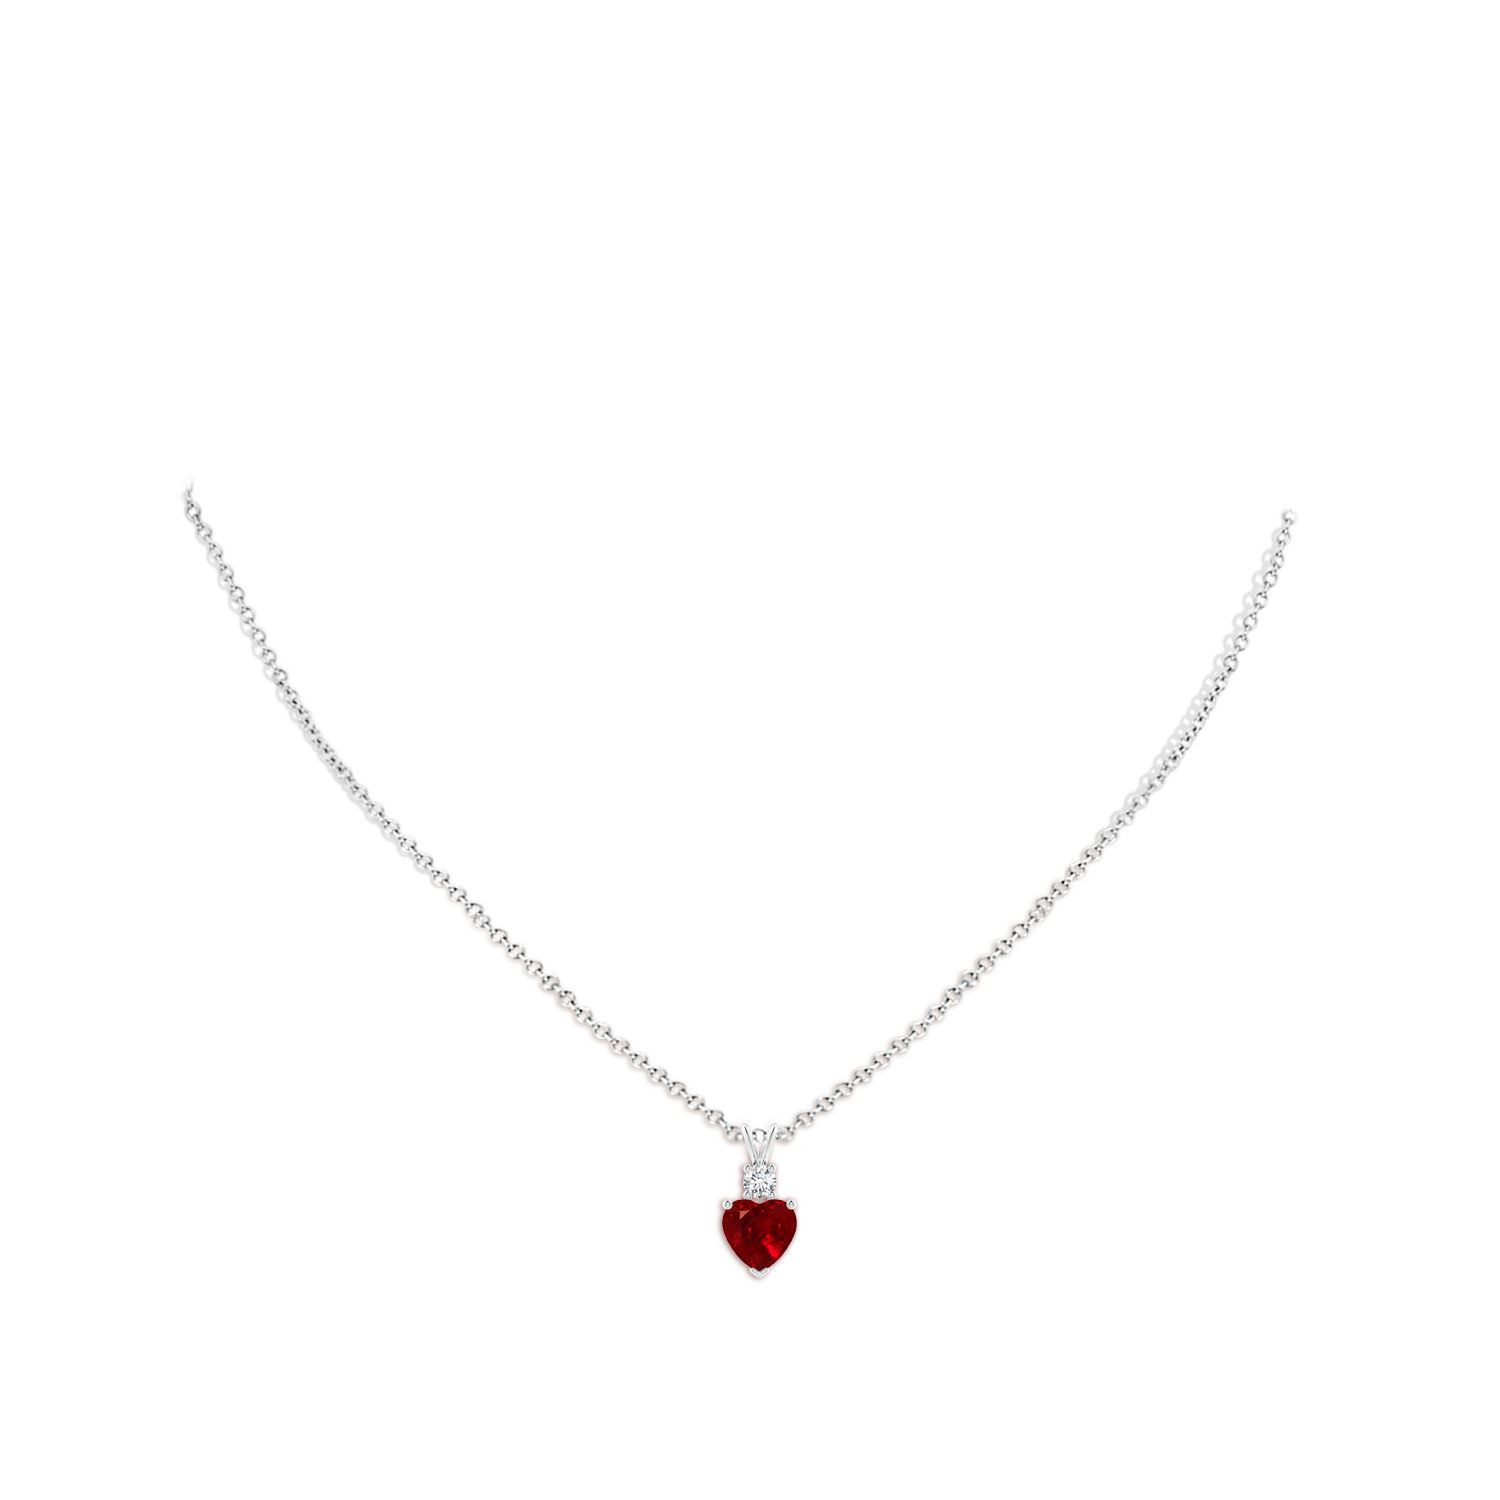 AAAA - Ruby / 1.8 CT / 14 KT White Gold